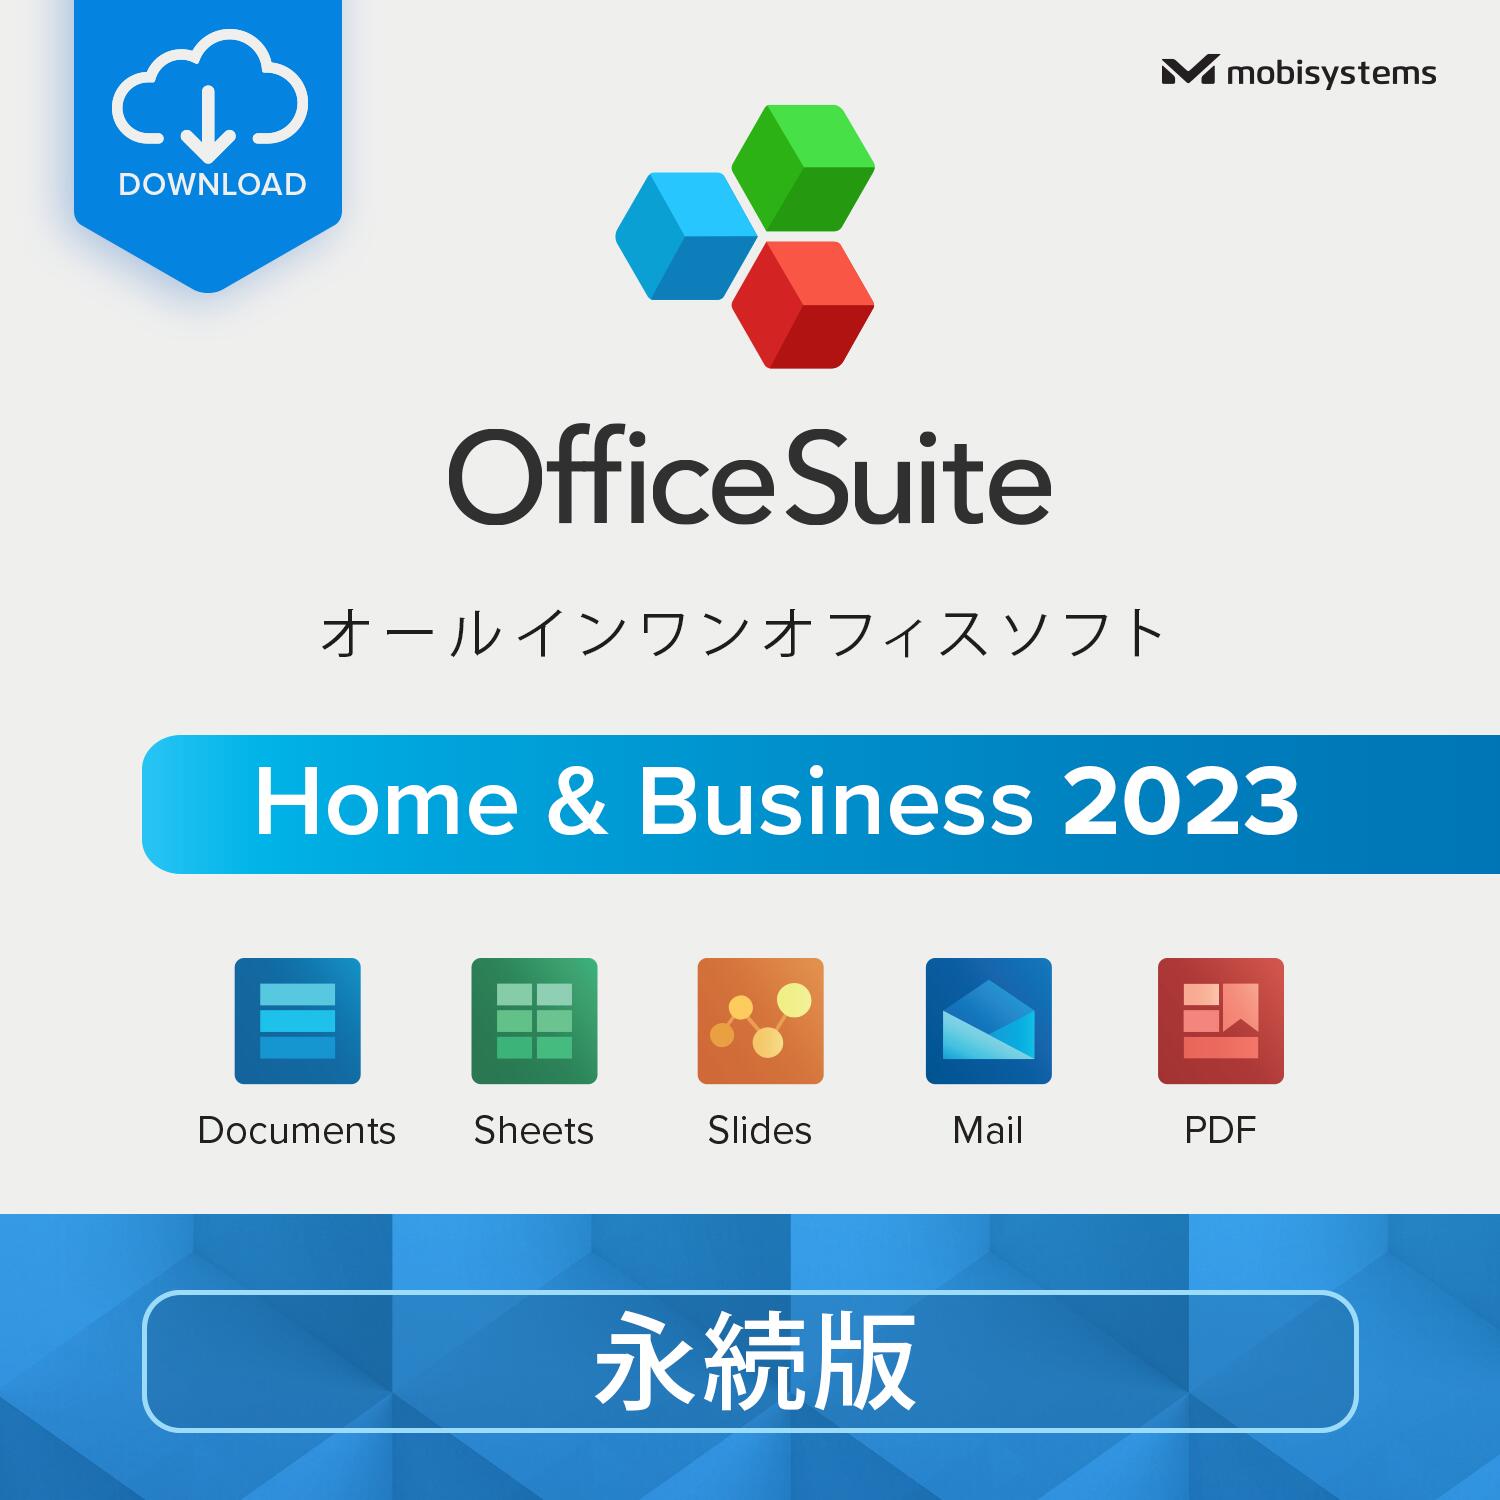 【OfficeSuite Home & Business】 ー フルライセンス ー Documents, Sheets, Slides, PDF Viewer, Mail & Calendar for Windows |永続版| |1ユーザあたり・ PC1台| |ダウンロード版|